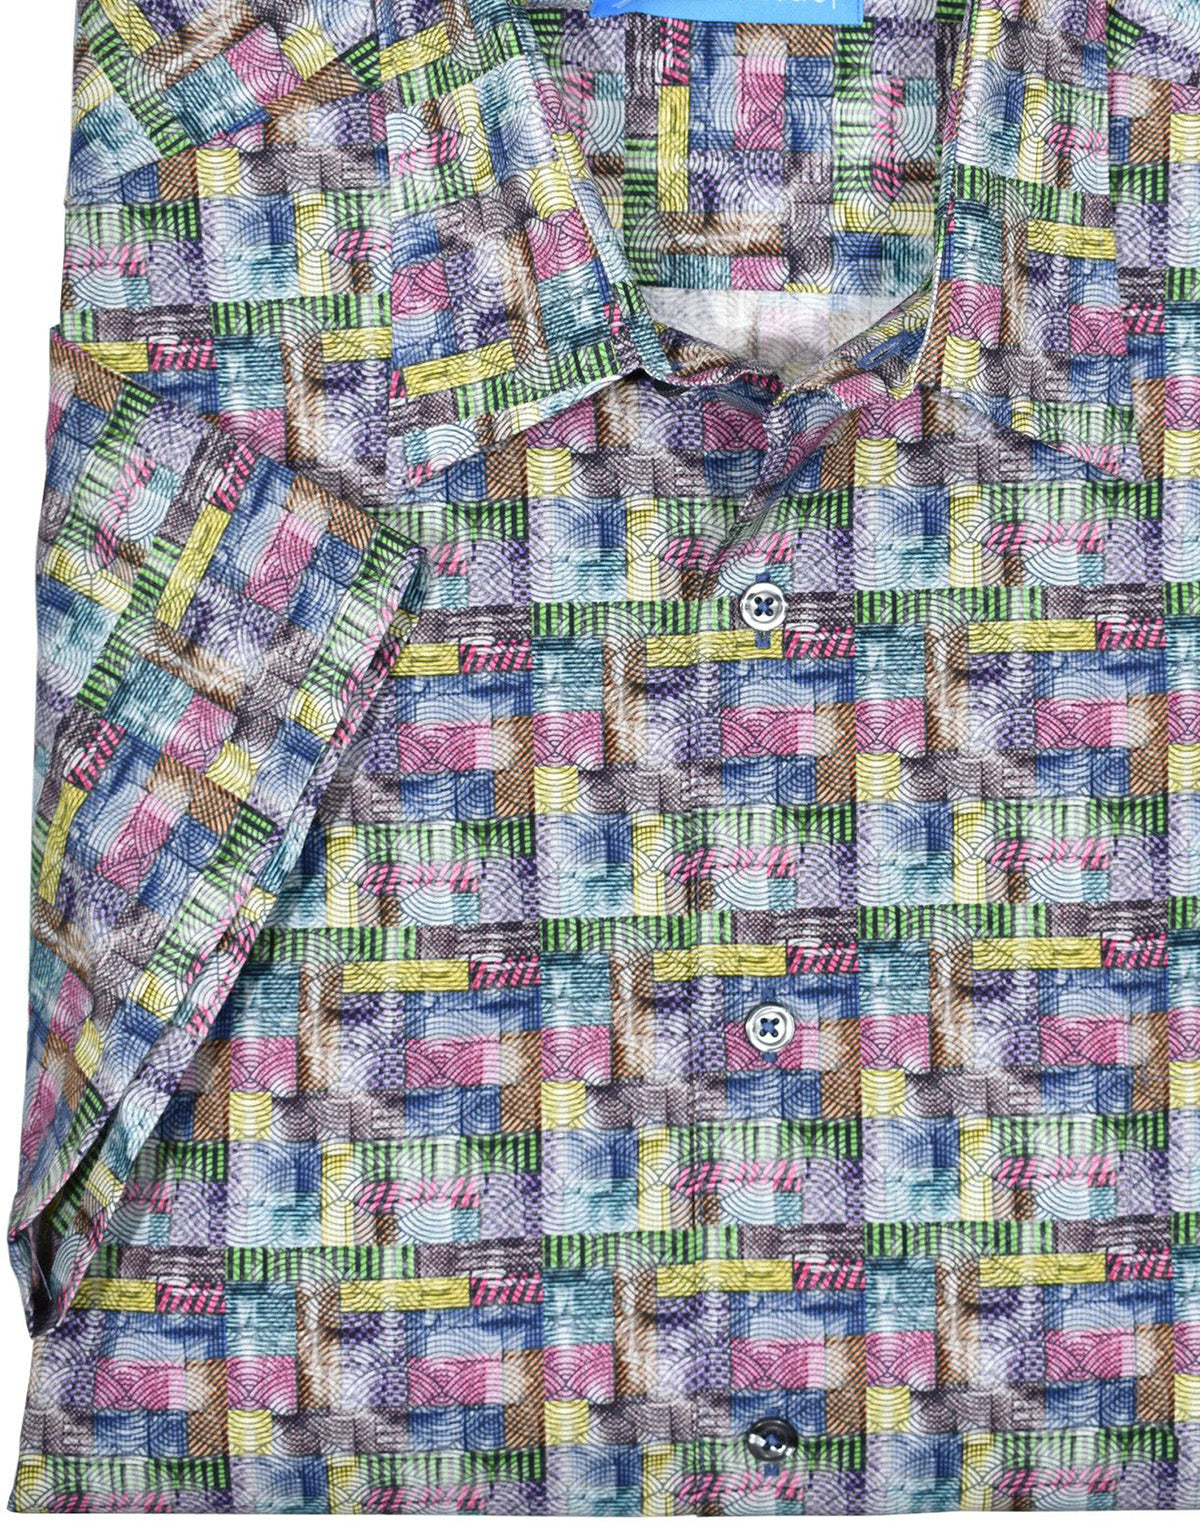 Relax in this tropical pattern! Pattern matched pocket, square bottom, short sleeve, exclusive cotton and classic full cut fit.  Justin Harvey Fractured Print  100% extra soft cotton. Perfectly matched left chest pocket. Soft coloration. Perfectly matched custom buttons. Square bottom with side slits.